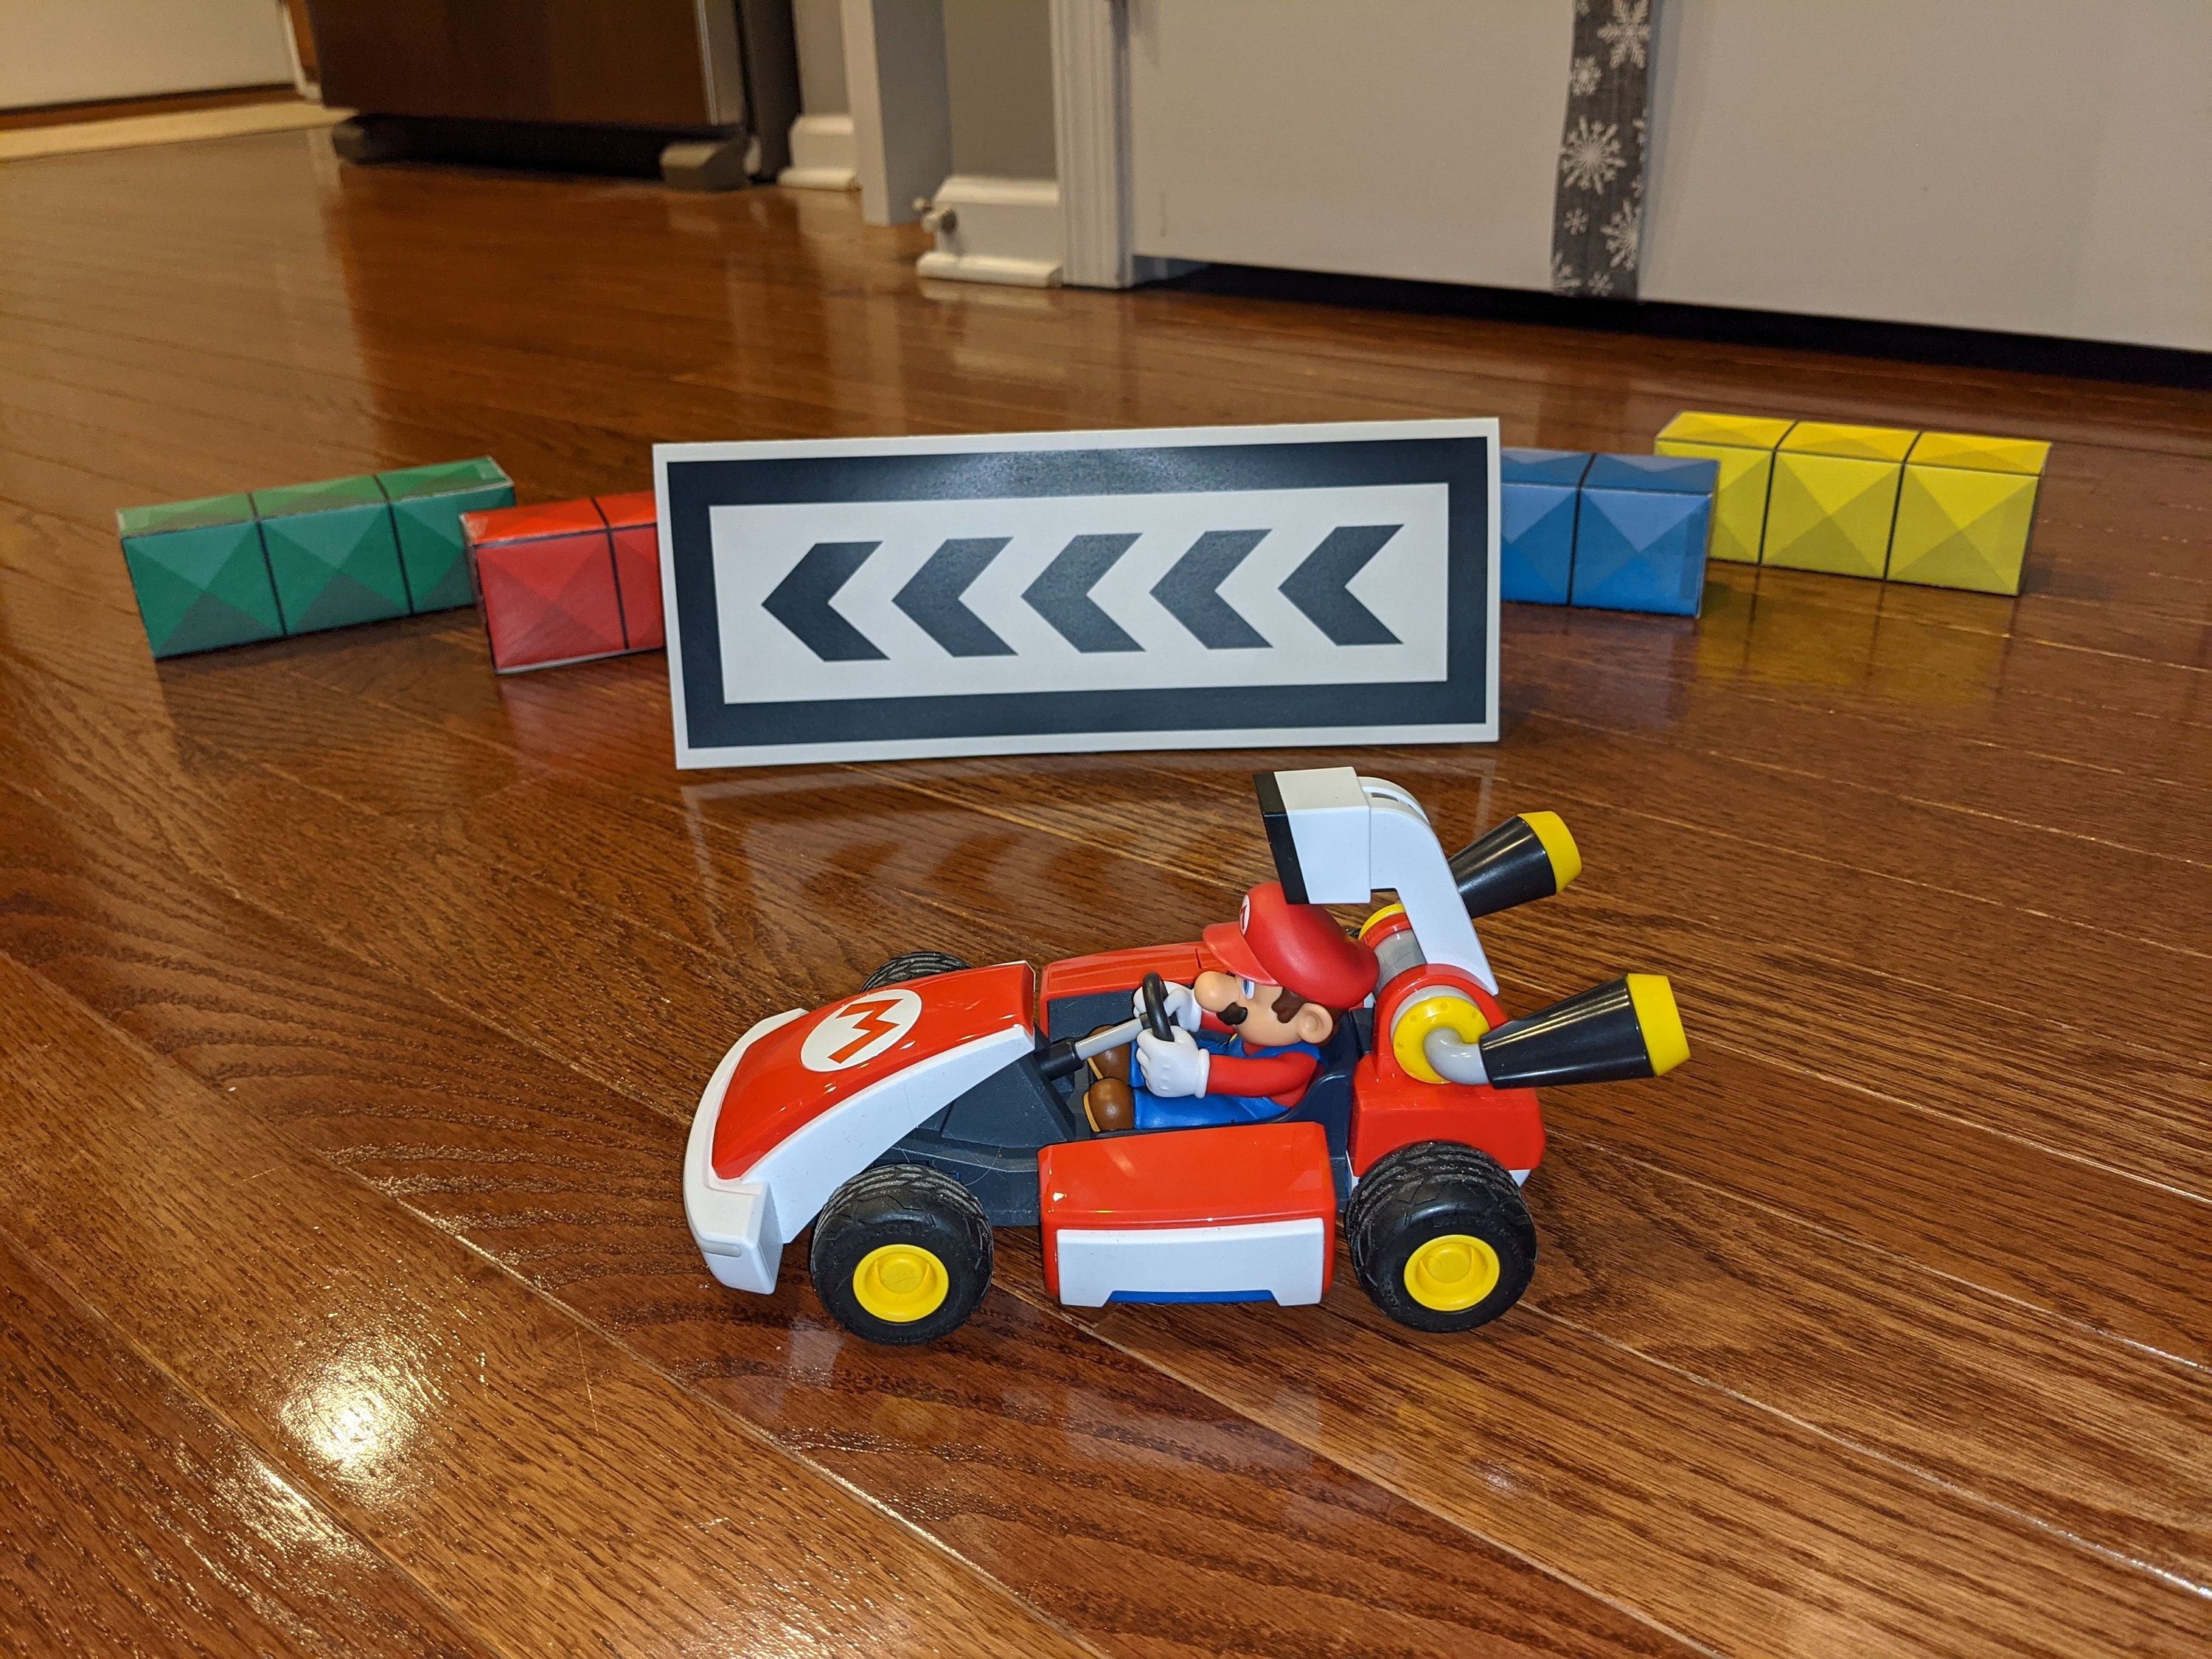 Mario Kart Live: Home Circuit review - A hell of a lot of magic for $100